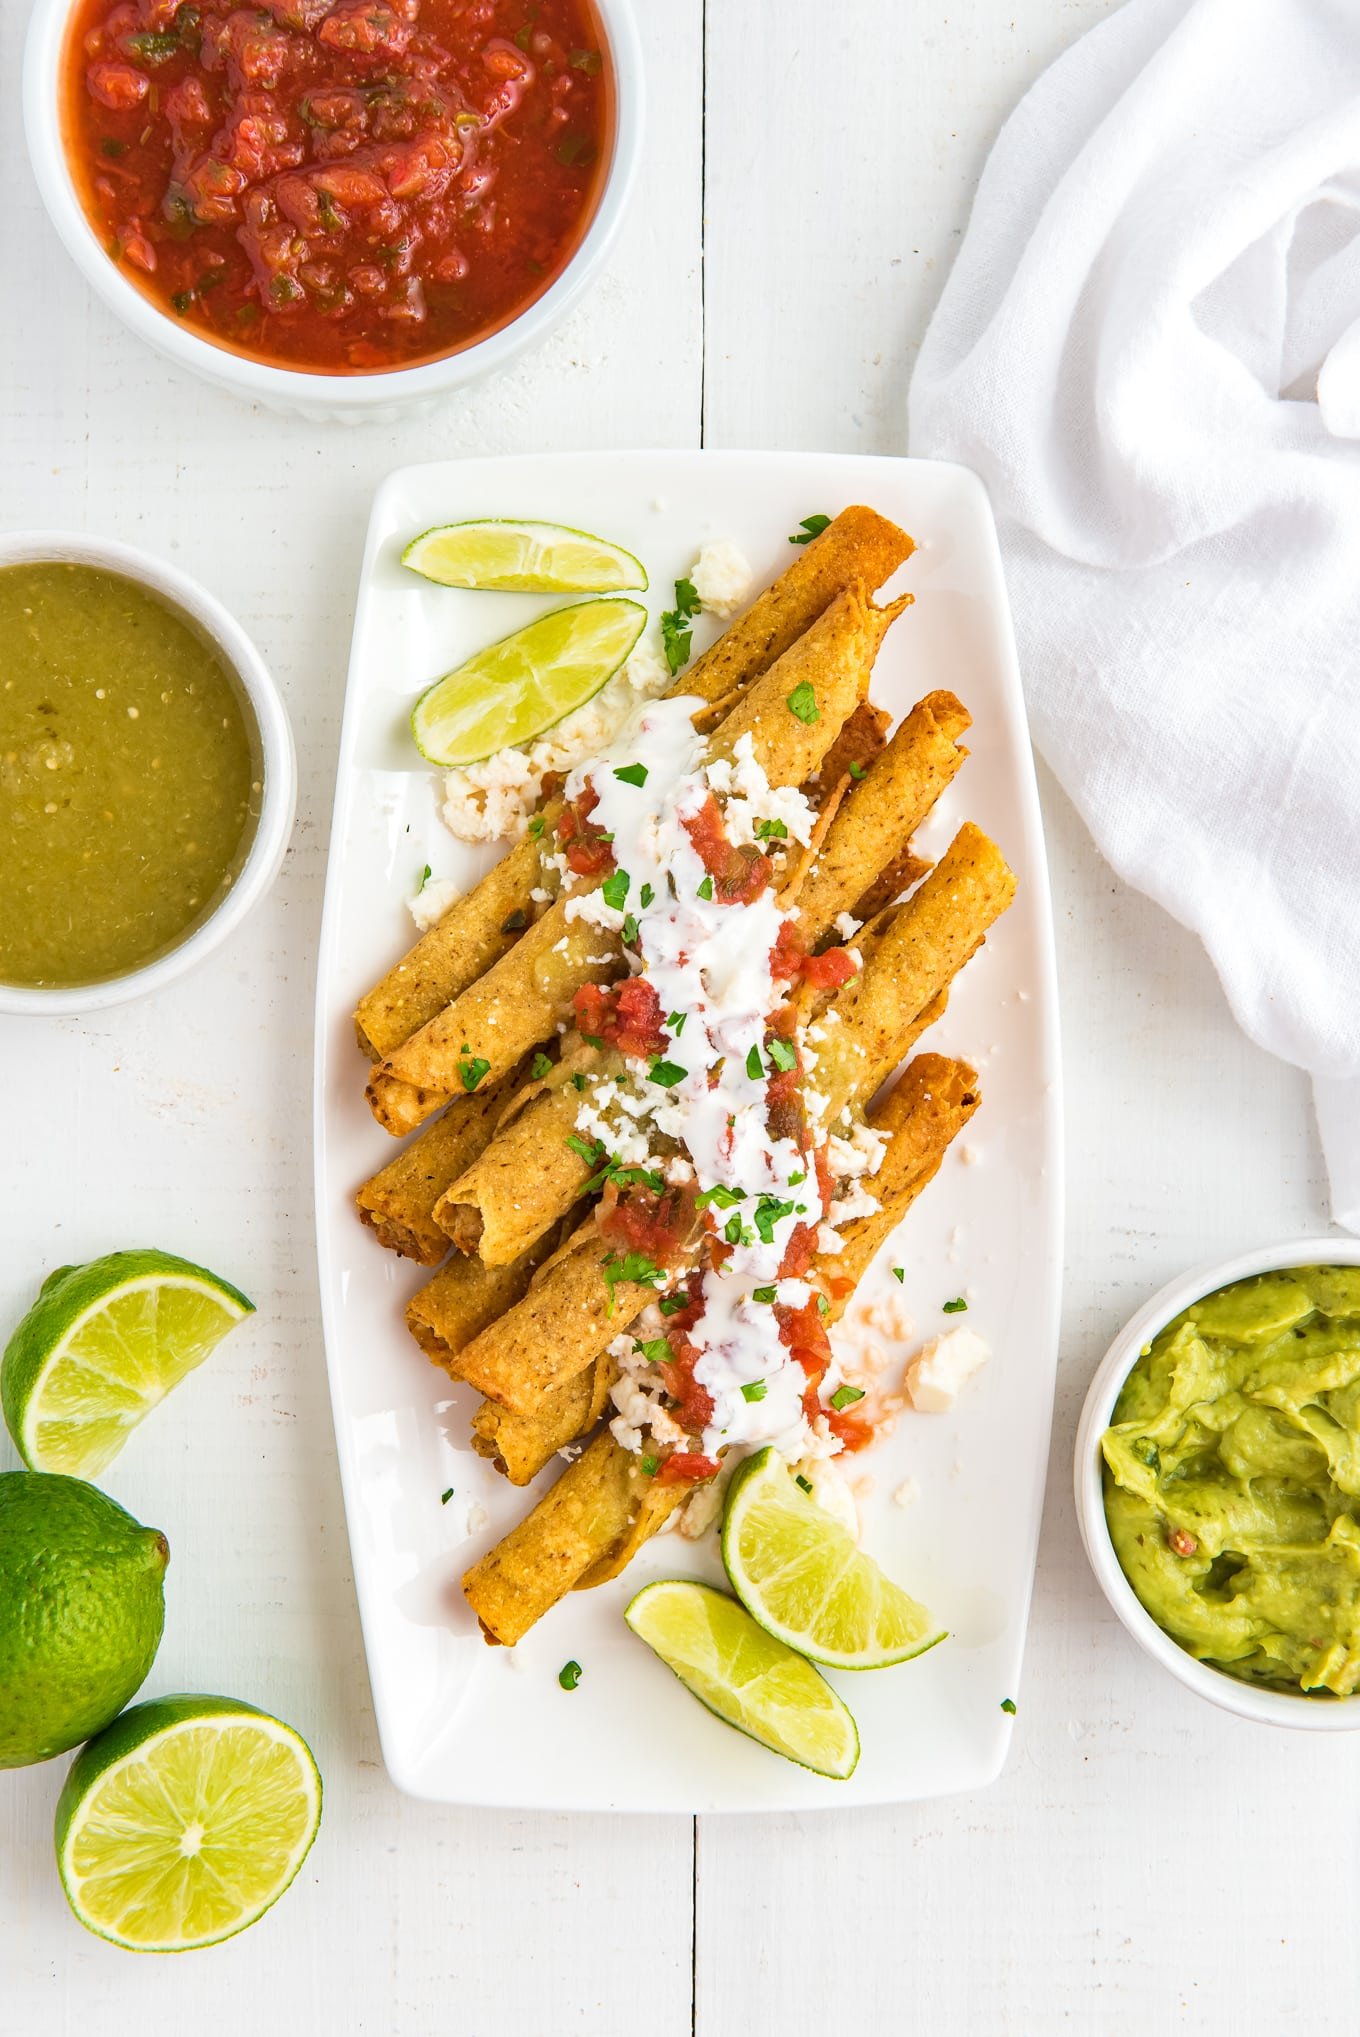 taquitos stacked on a plate topped with queso fresa cheese, salsa verde, Mexican sour cream, and salsa. And then put the guacamole and salsa on the side.